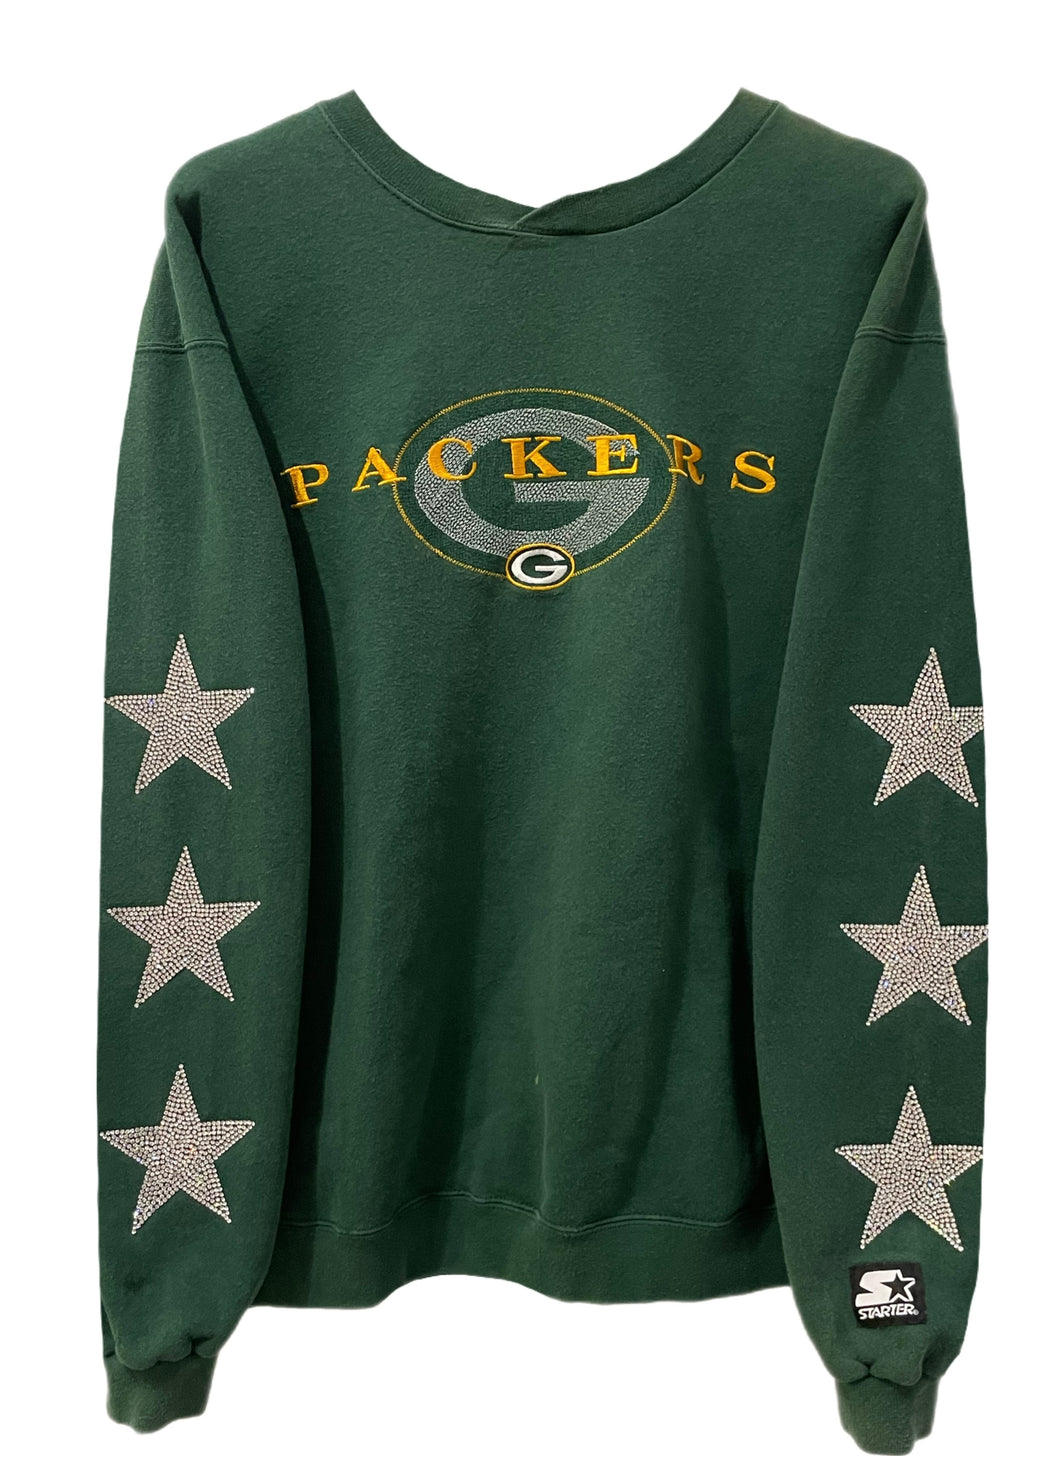 Green Bay Packers, Football One of a KIND Vintage Sweatshirt with Three Crystal Star Design